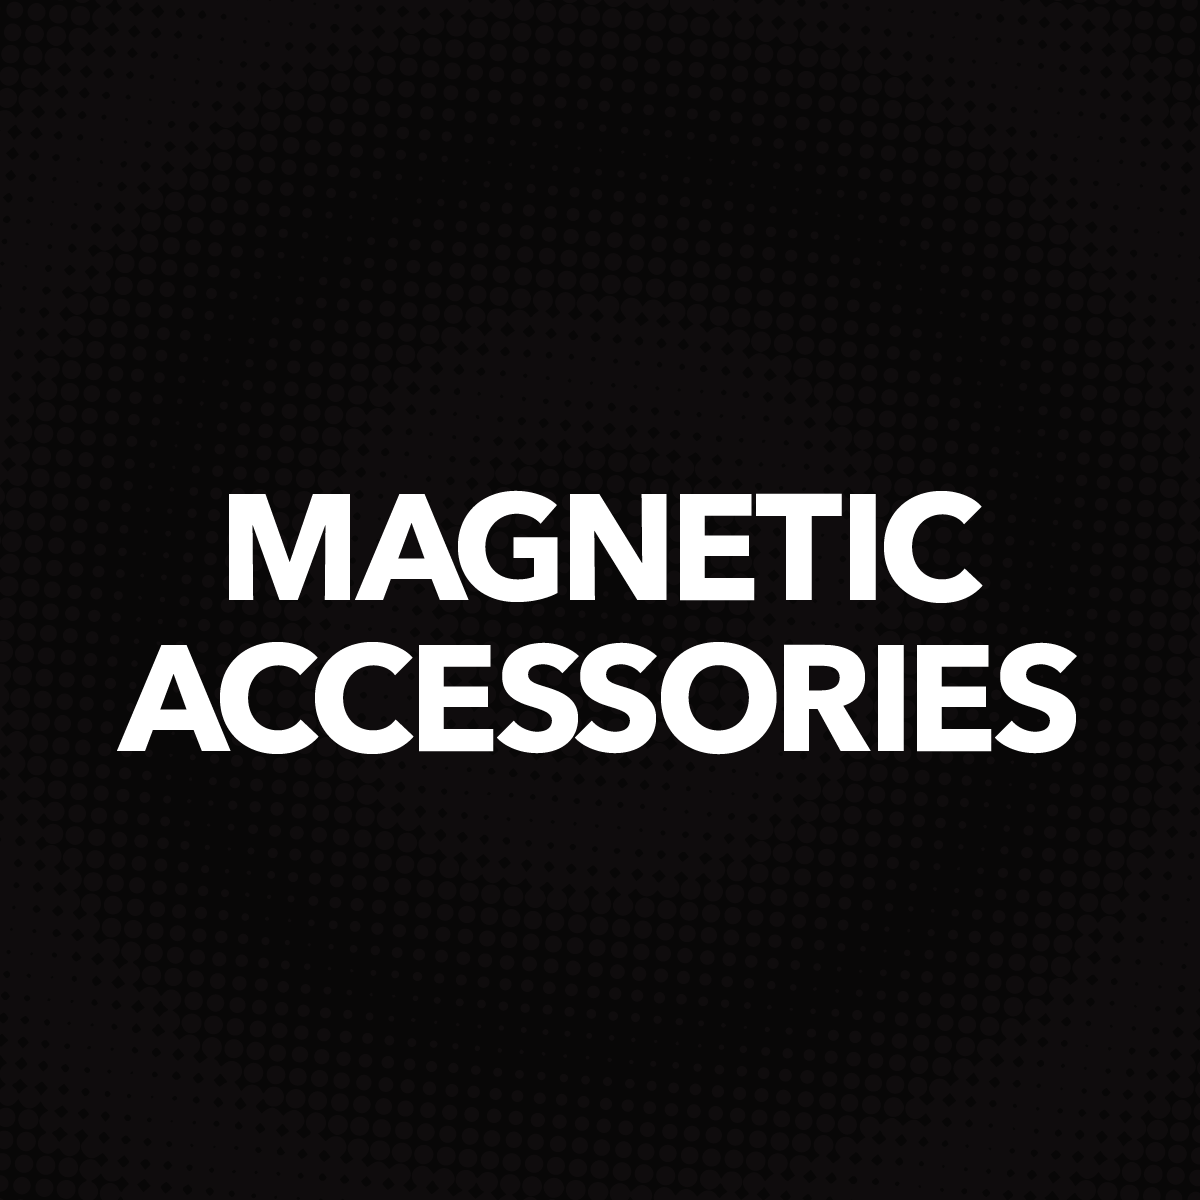 Magnetic Accessories text